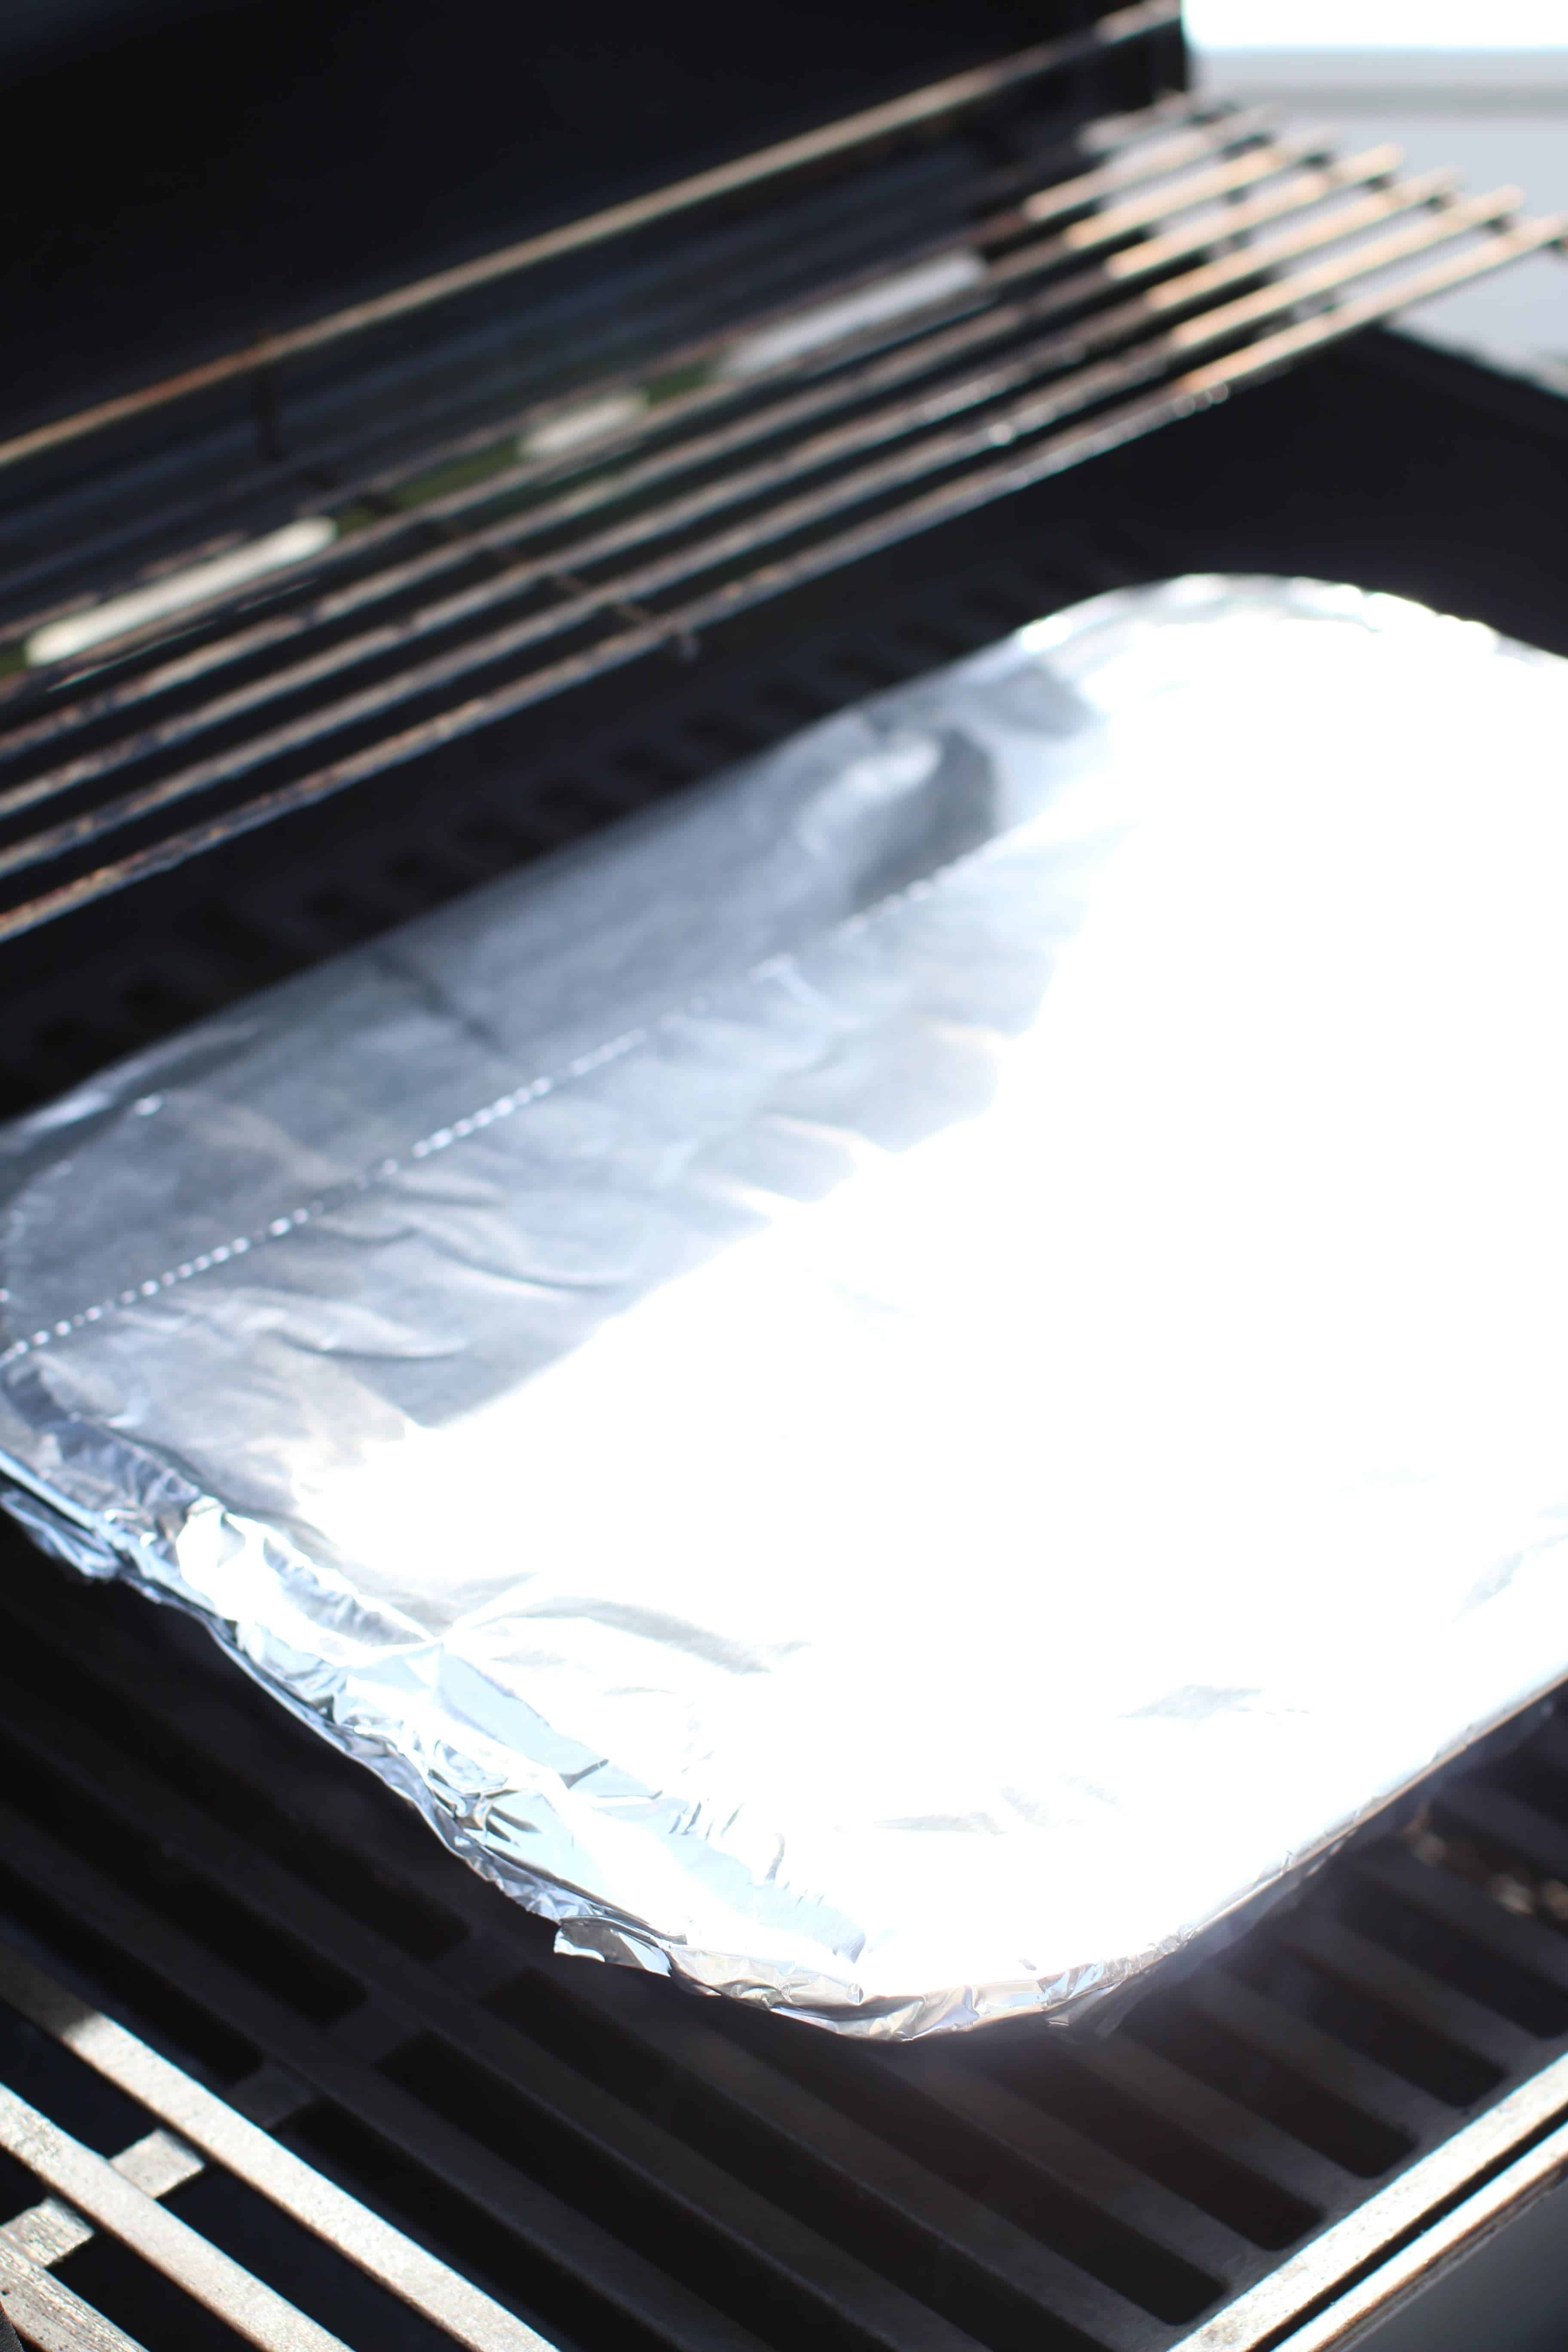 aluminum pan covered with aluminum foil shown on a glass grill.